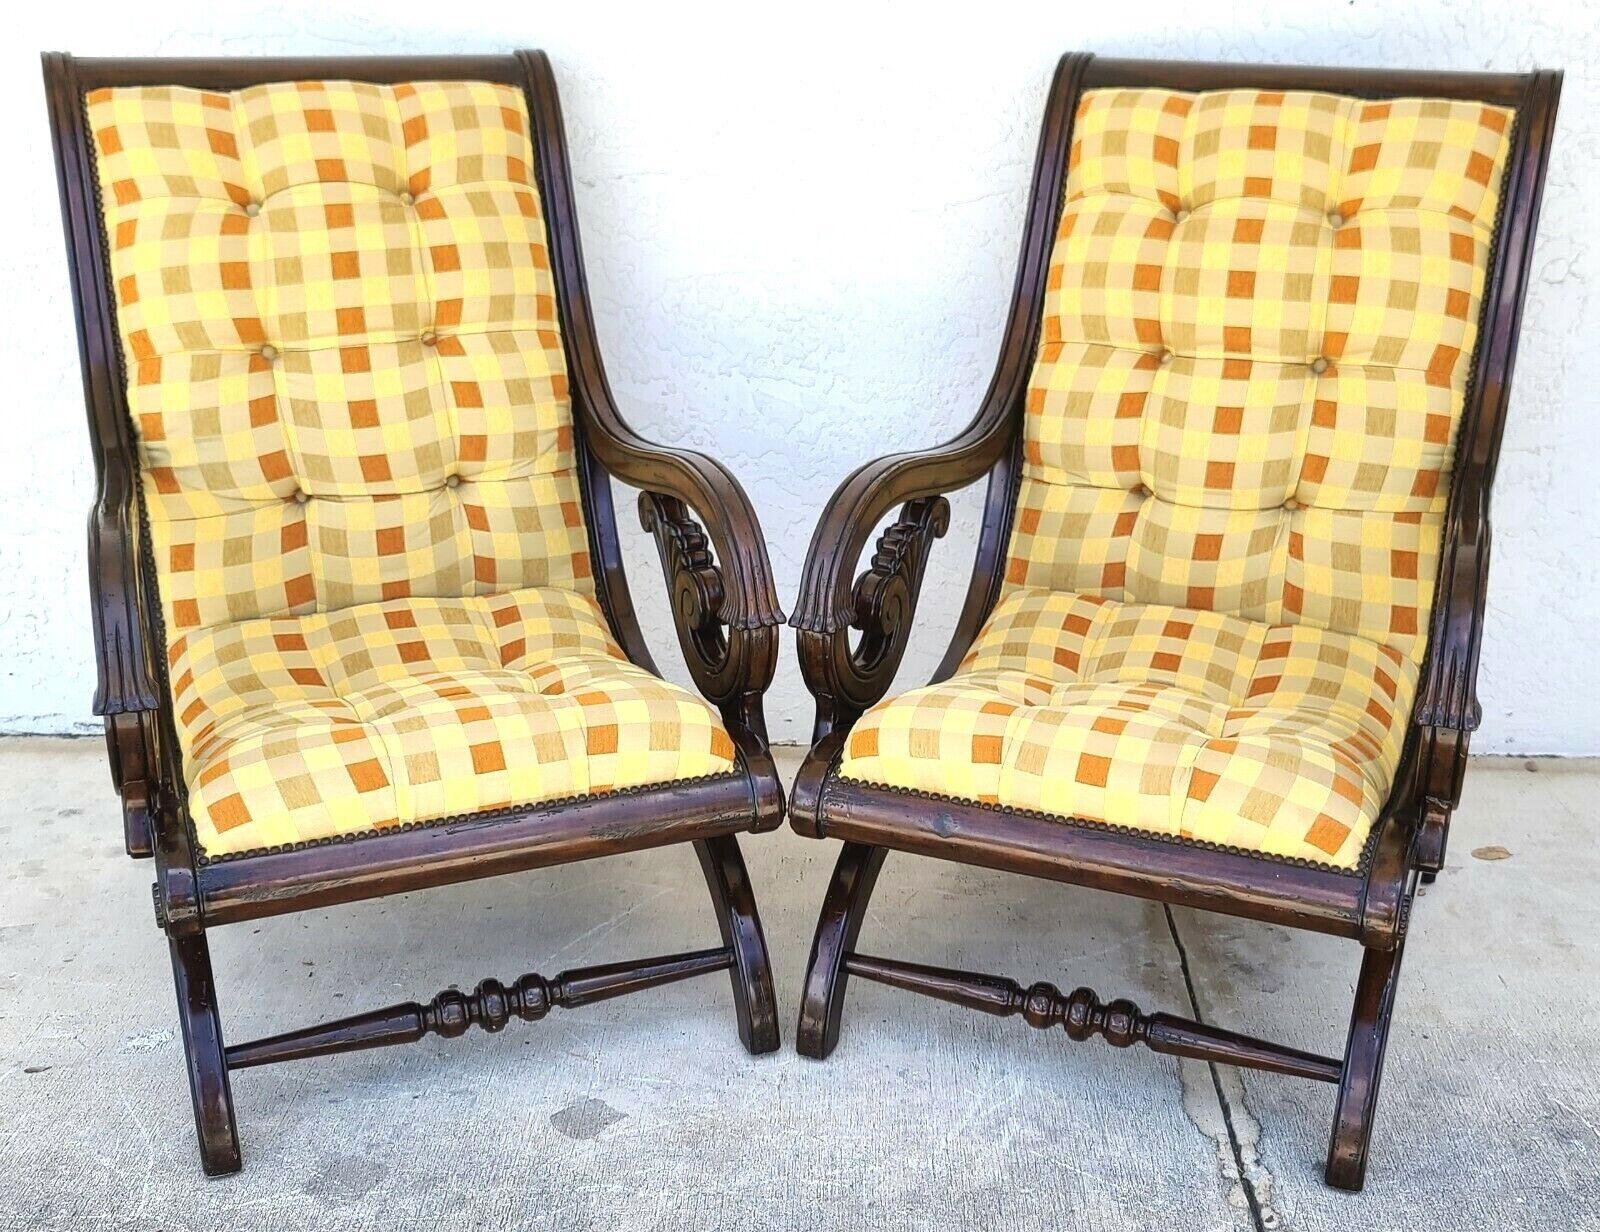 For FULL item description be sure to click on CONTINUE READING at the bottom of this listing.

Offering One Of Our Recent Palm Beach Estate Fine Furniture Acquisitions Of A
Pair of Tufted Regency Style Scroll Arm Armchairs By MARGE